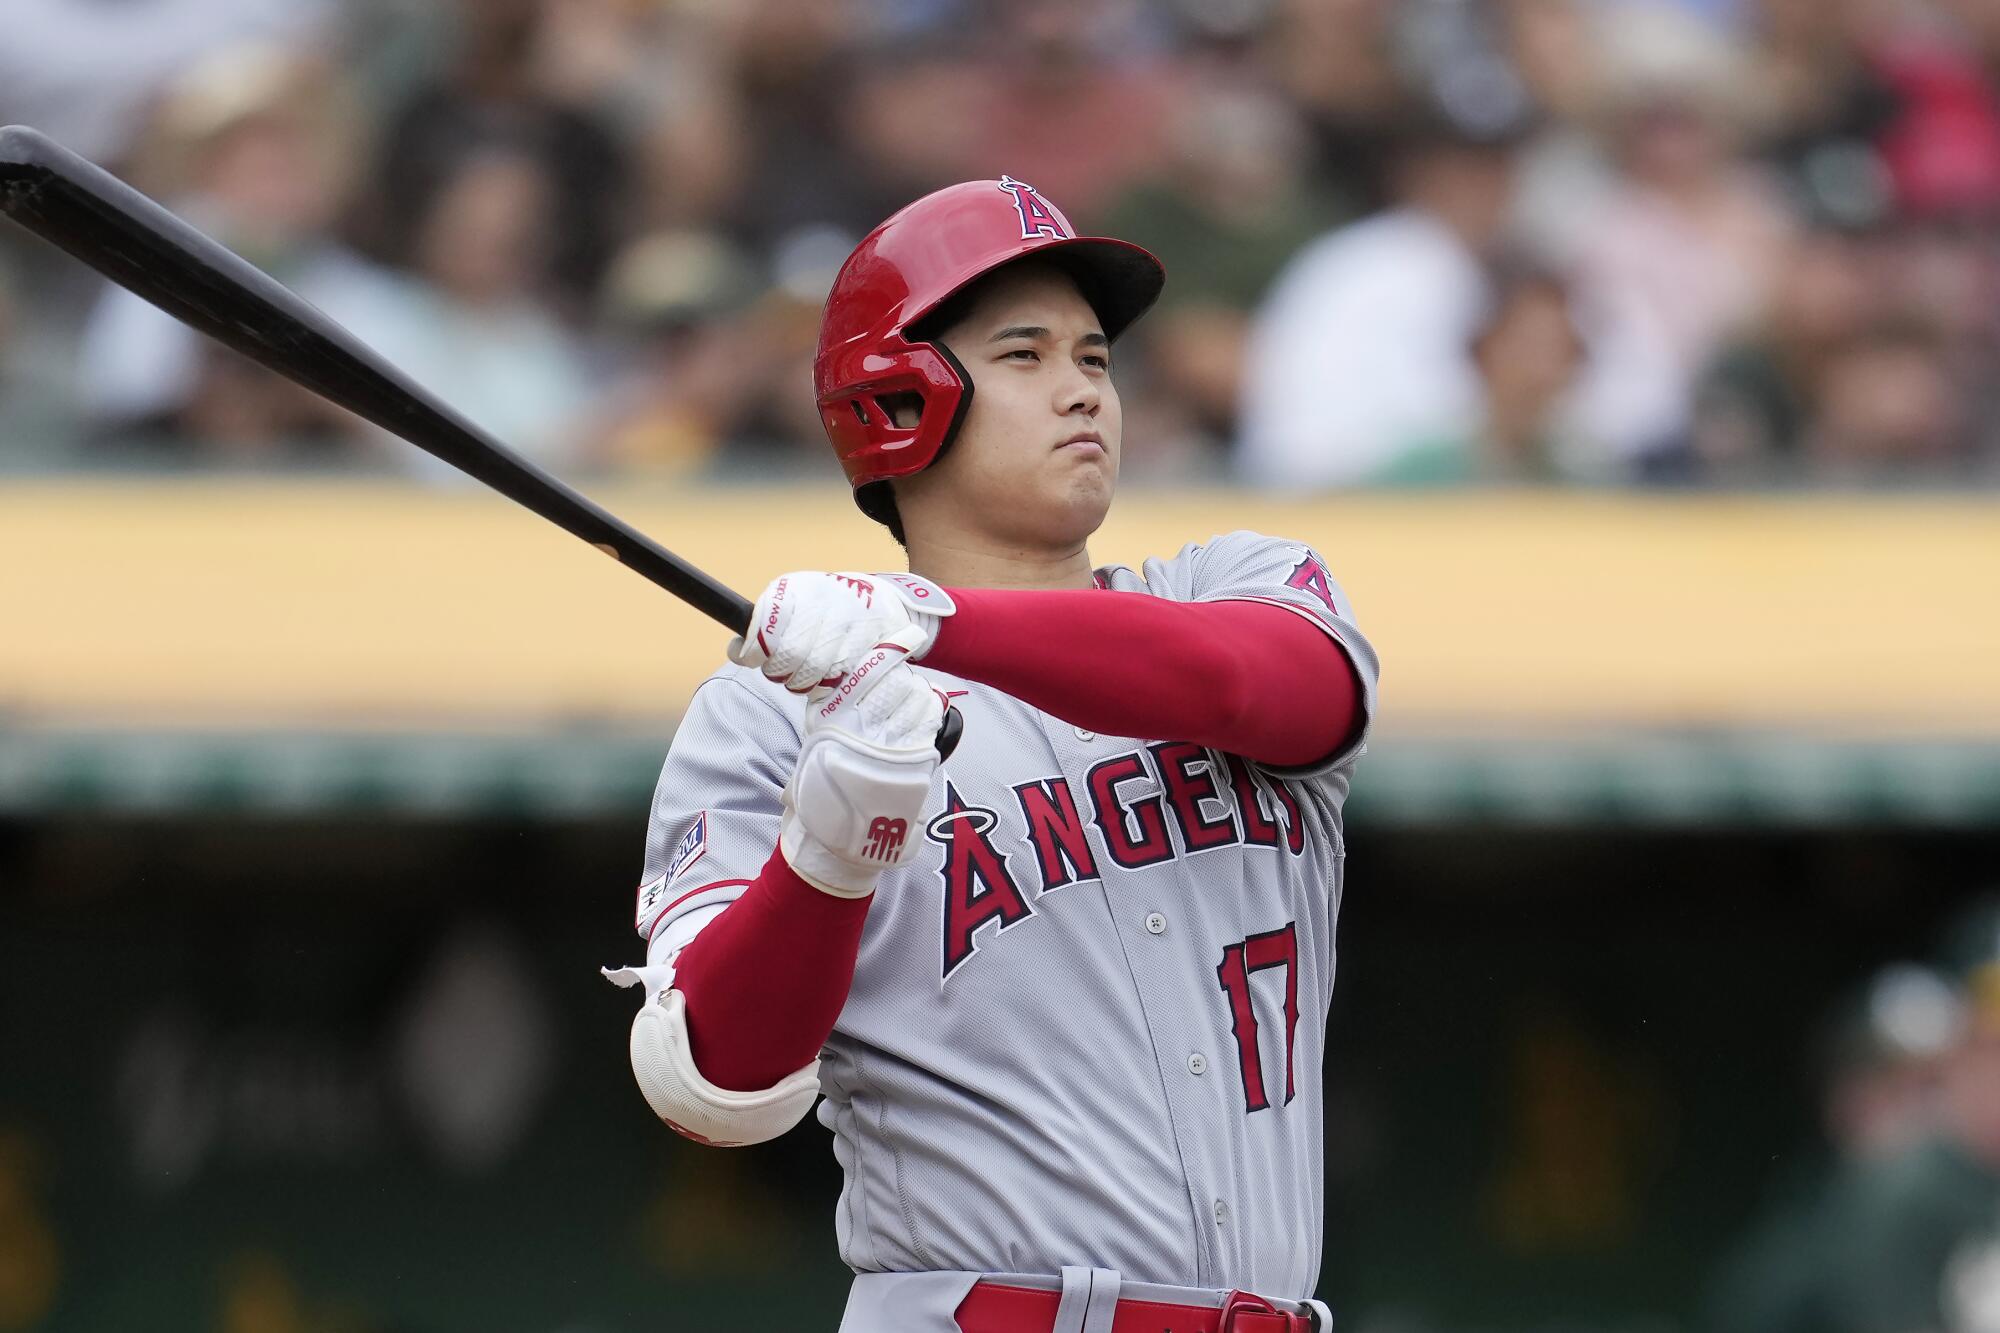 Angels two-way star Shohei Ohtani follows through on a swing during a recent game.